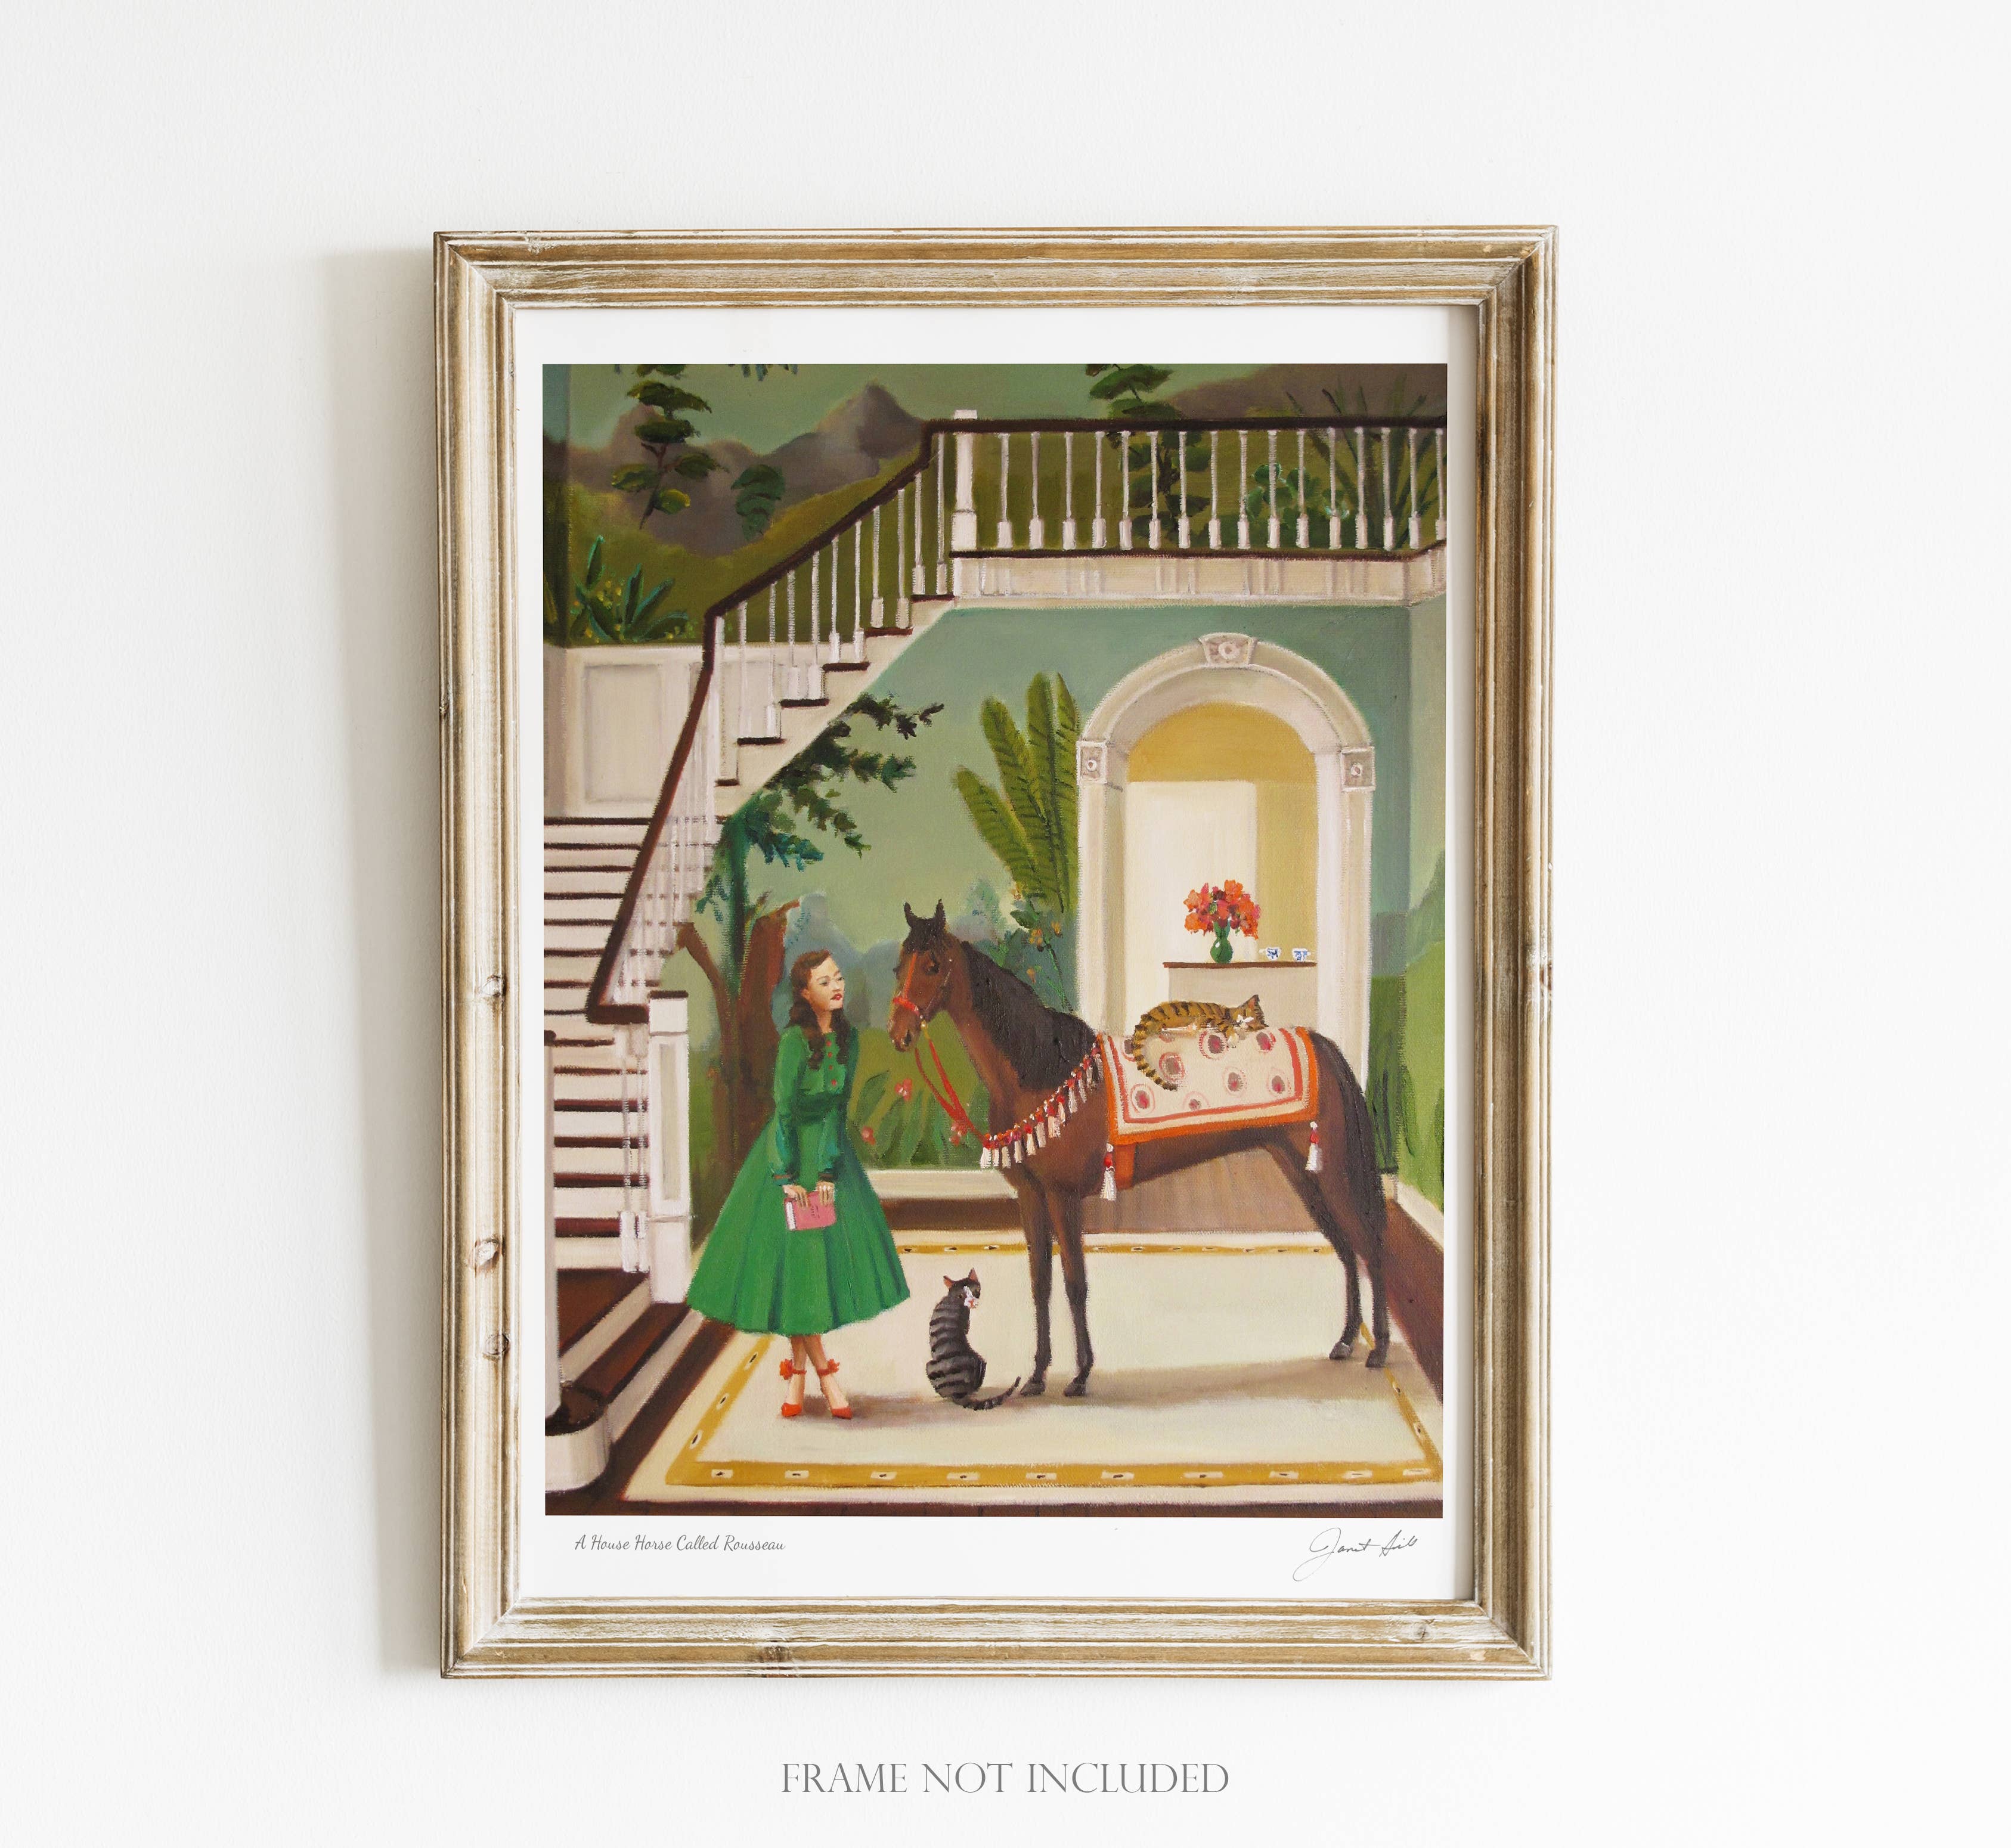 Colourful art print with a girl standing with her horse inside her house.